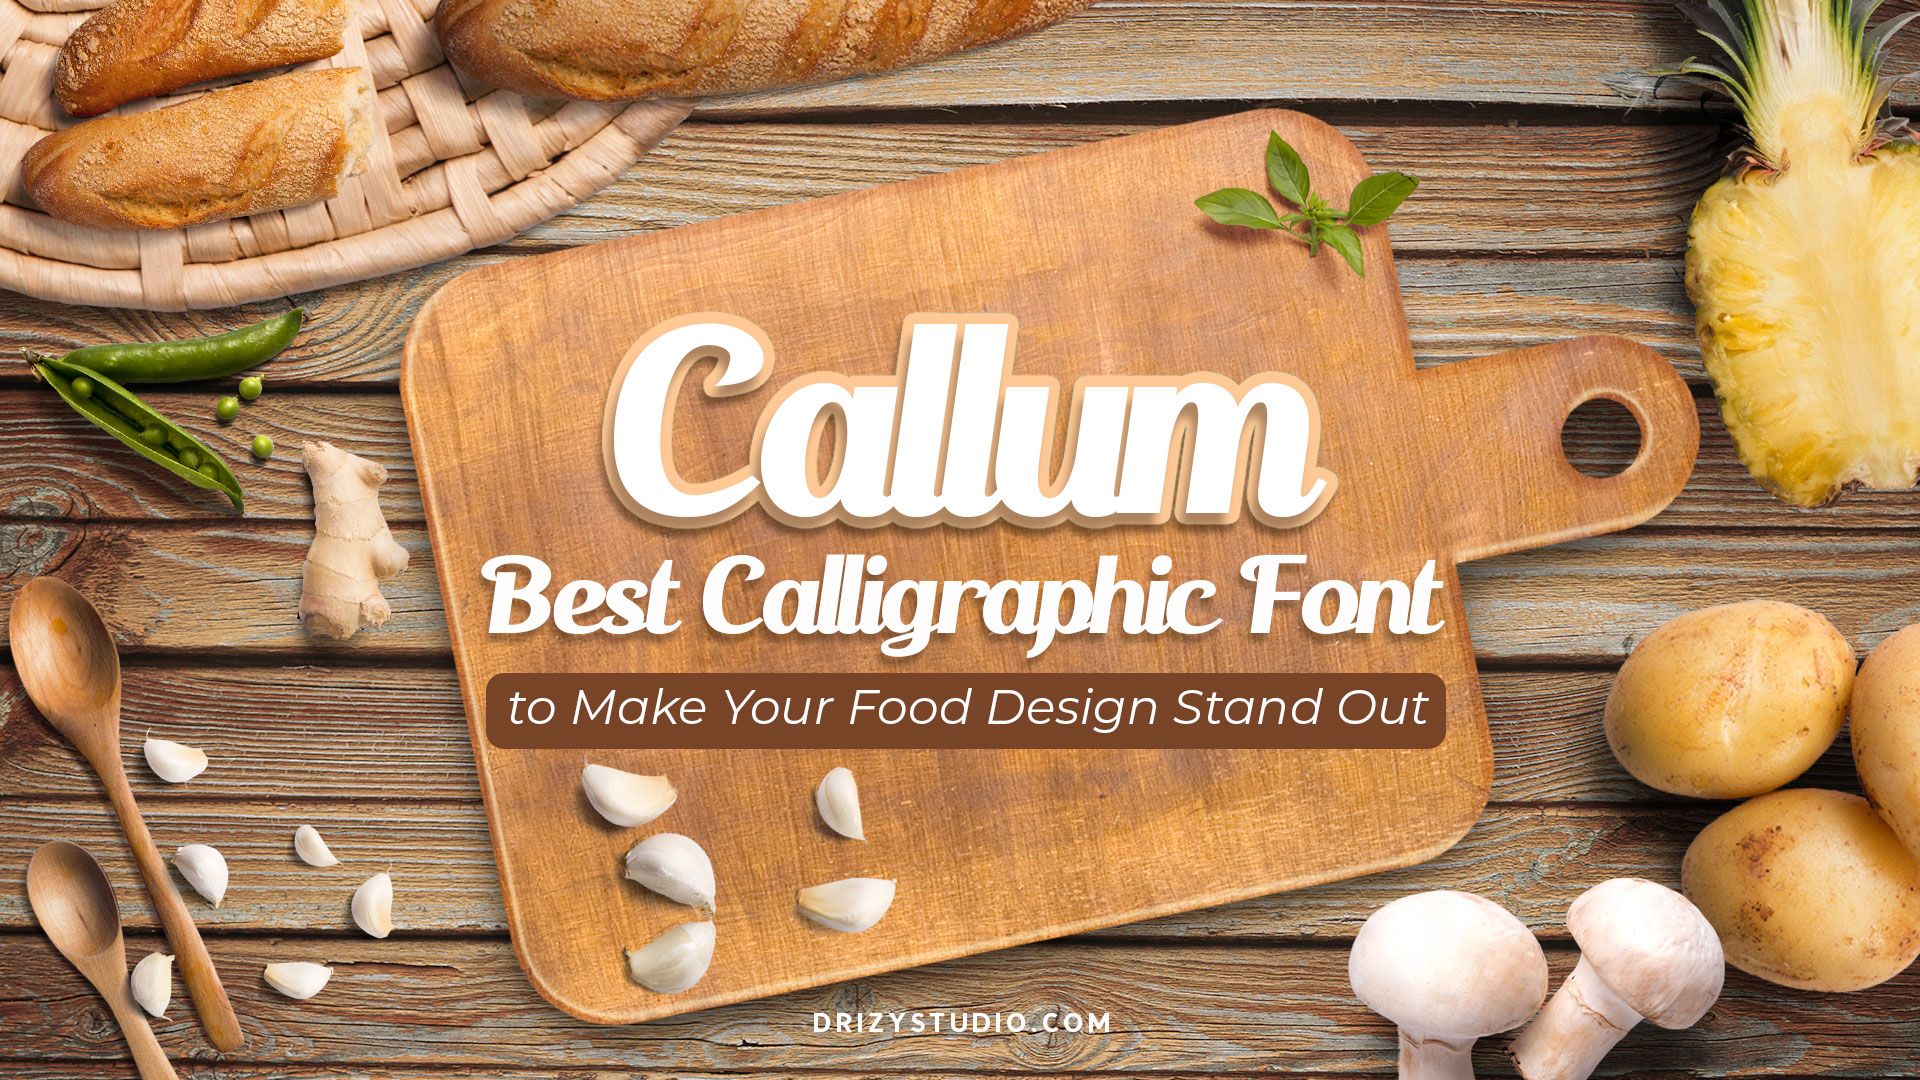 Callum Best Calligraphic Font to Make Your Food Design Stand Out cover